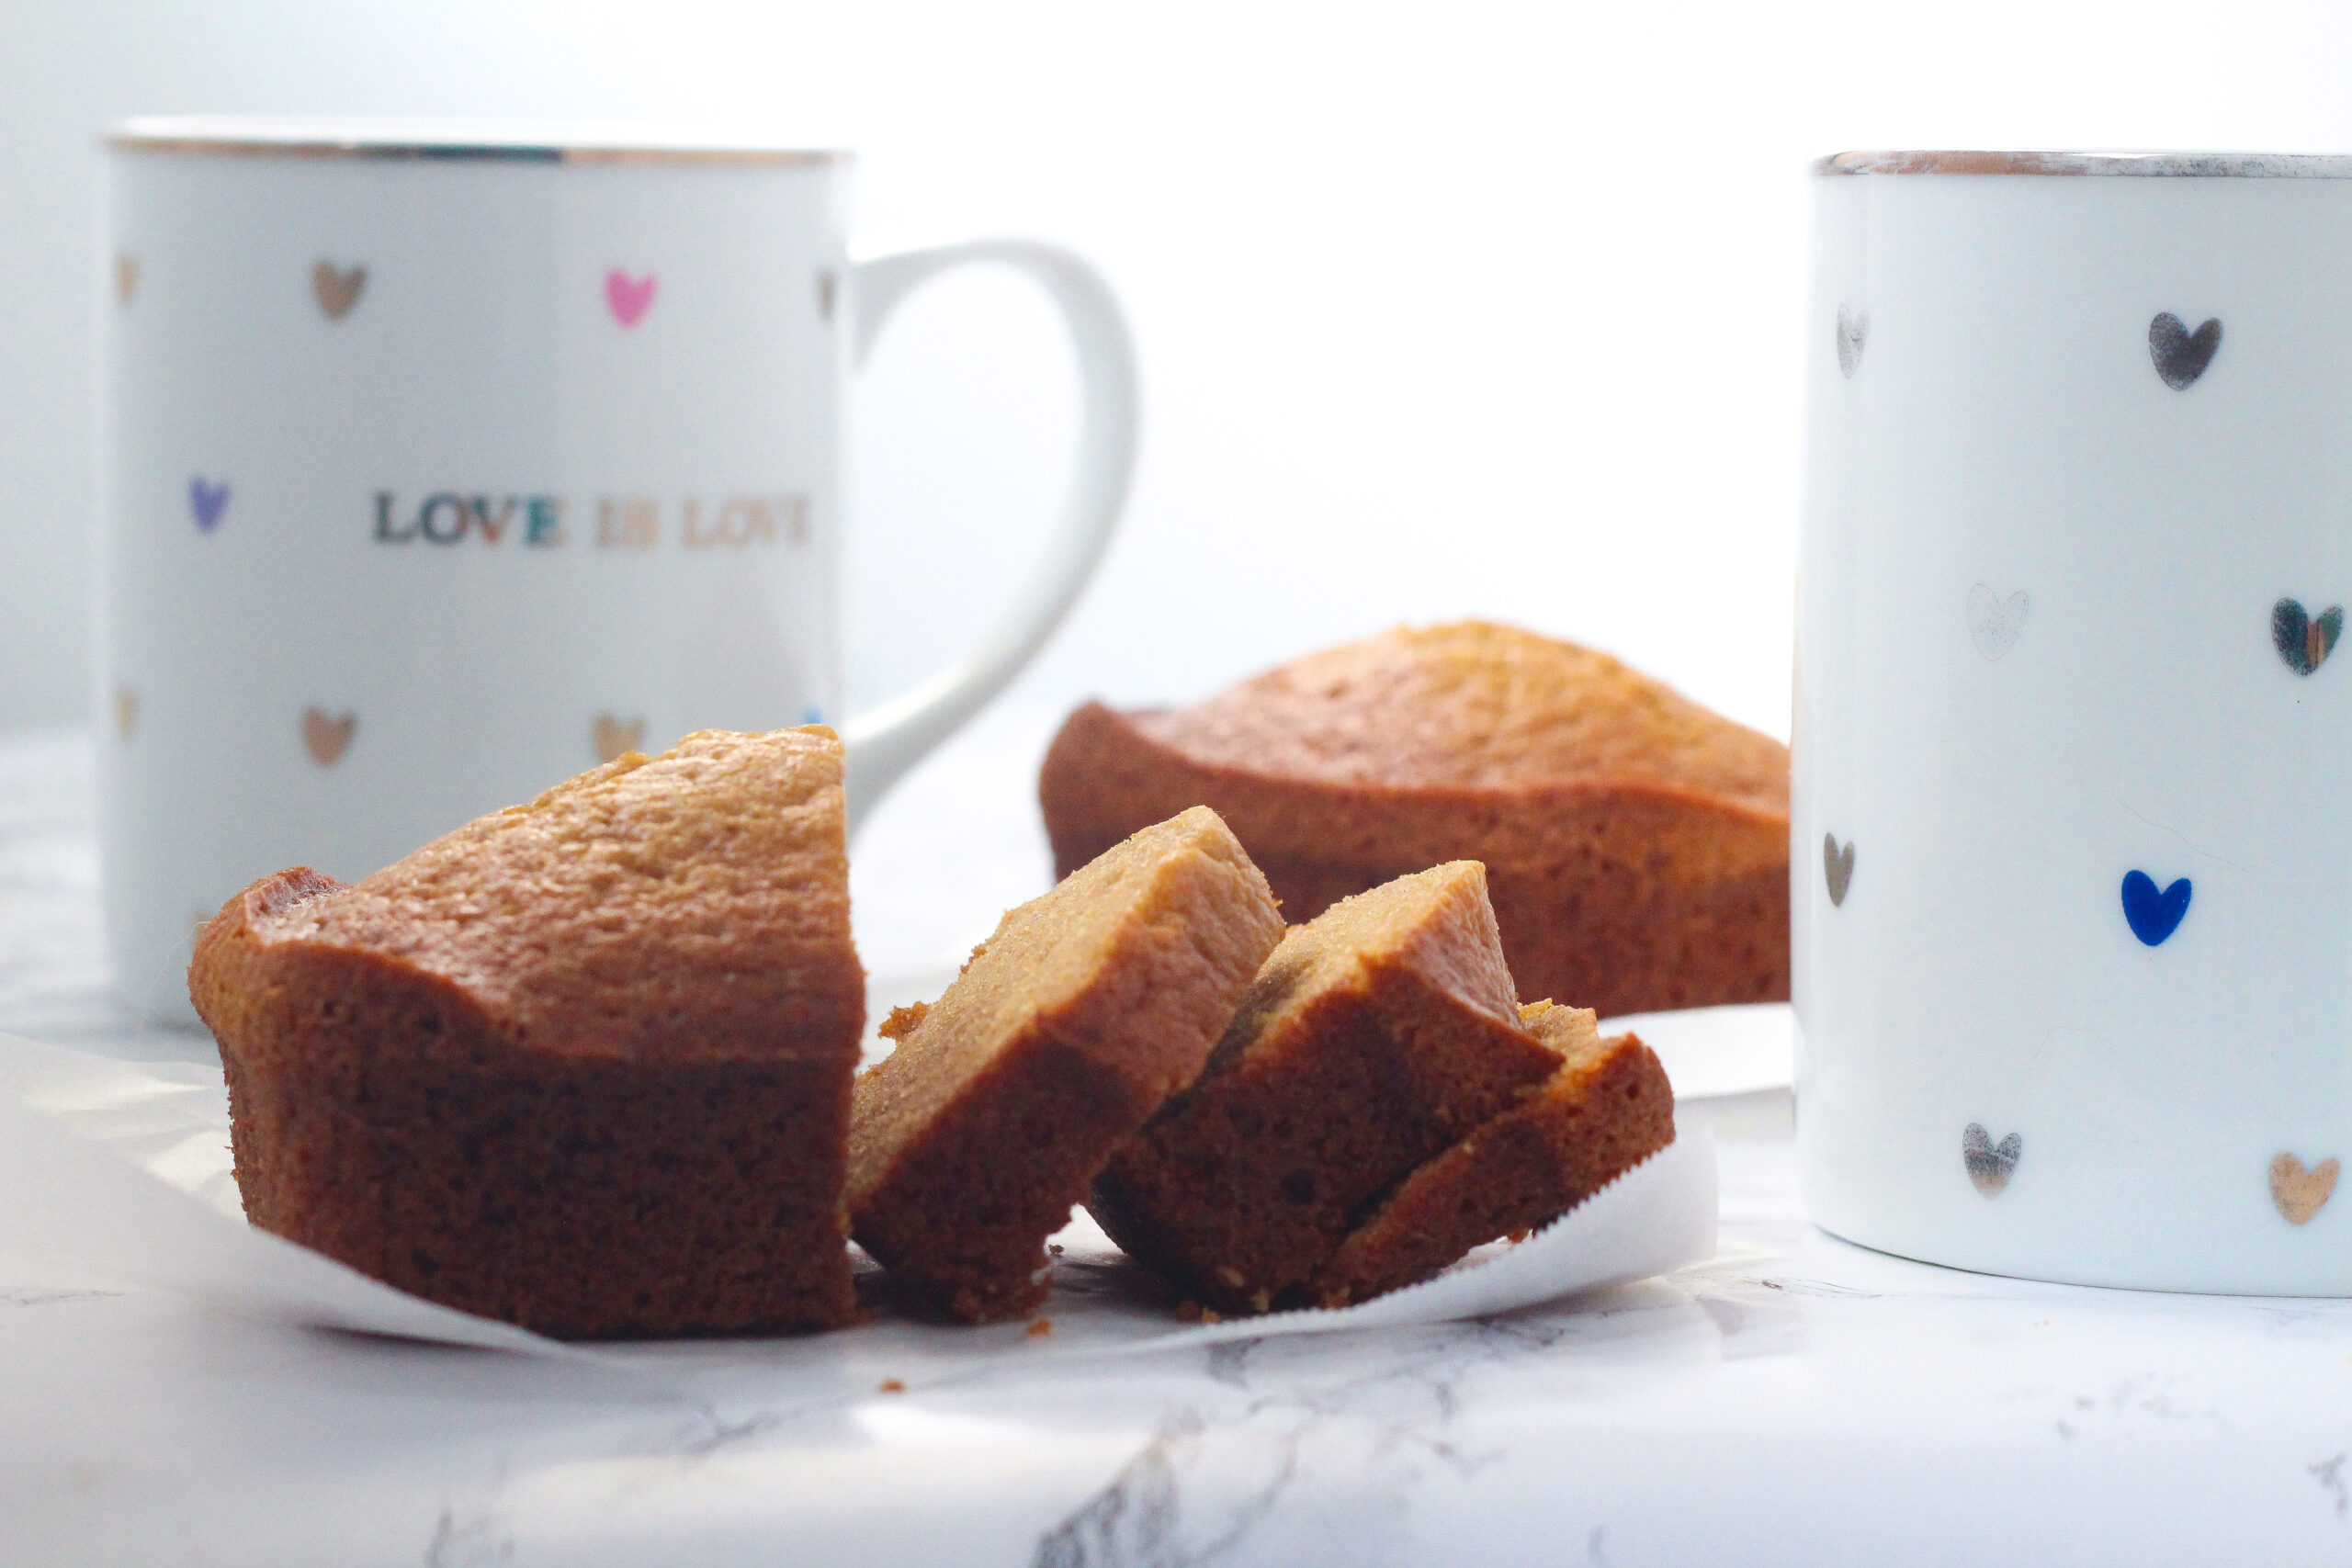 Side view of a partially sliced chai loaf with a whole chai loaf in the background. Behind the sliced chai loaf toward the left is a white mug with colorful hearts that says love is love, and next to the sliced chai loaf to the right, cut off in the frame, is a matching mug, but without the words